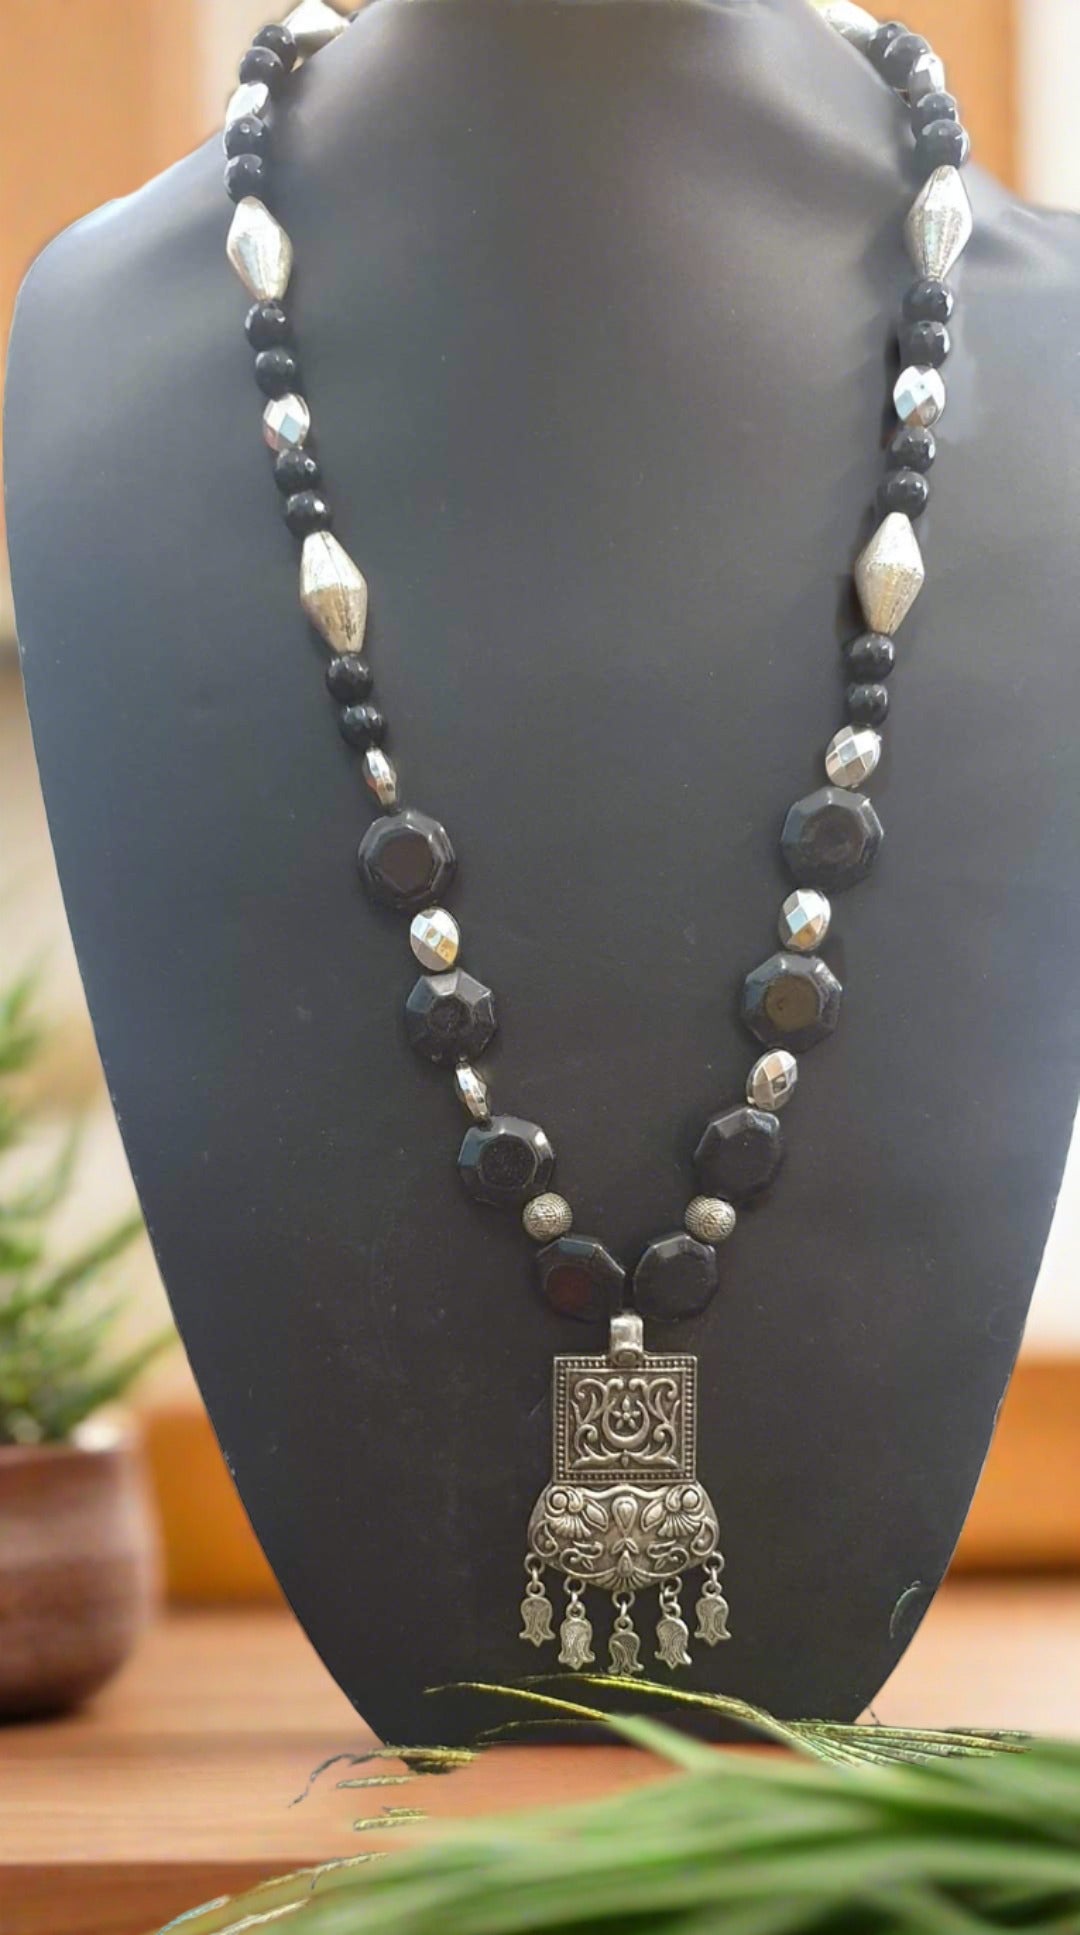 Natural Black Onyx and Agate Gemstone Necklace with Pendant